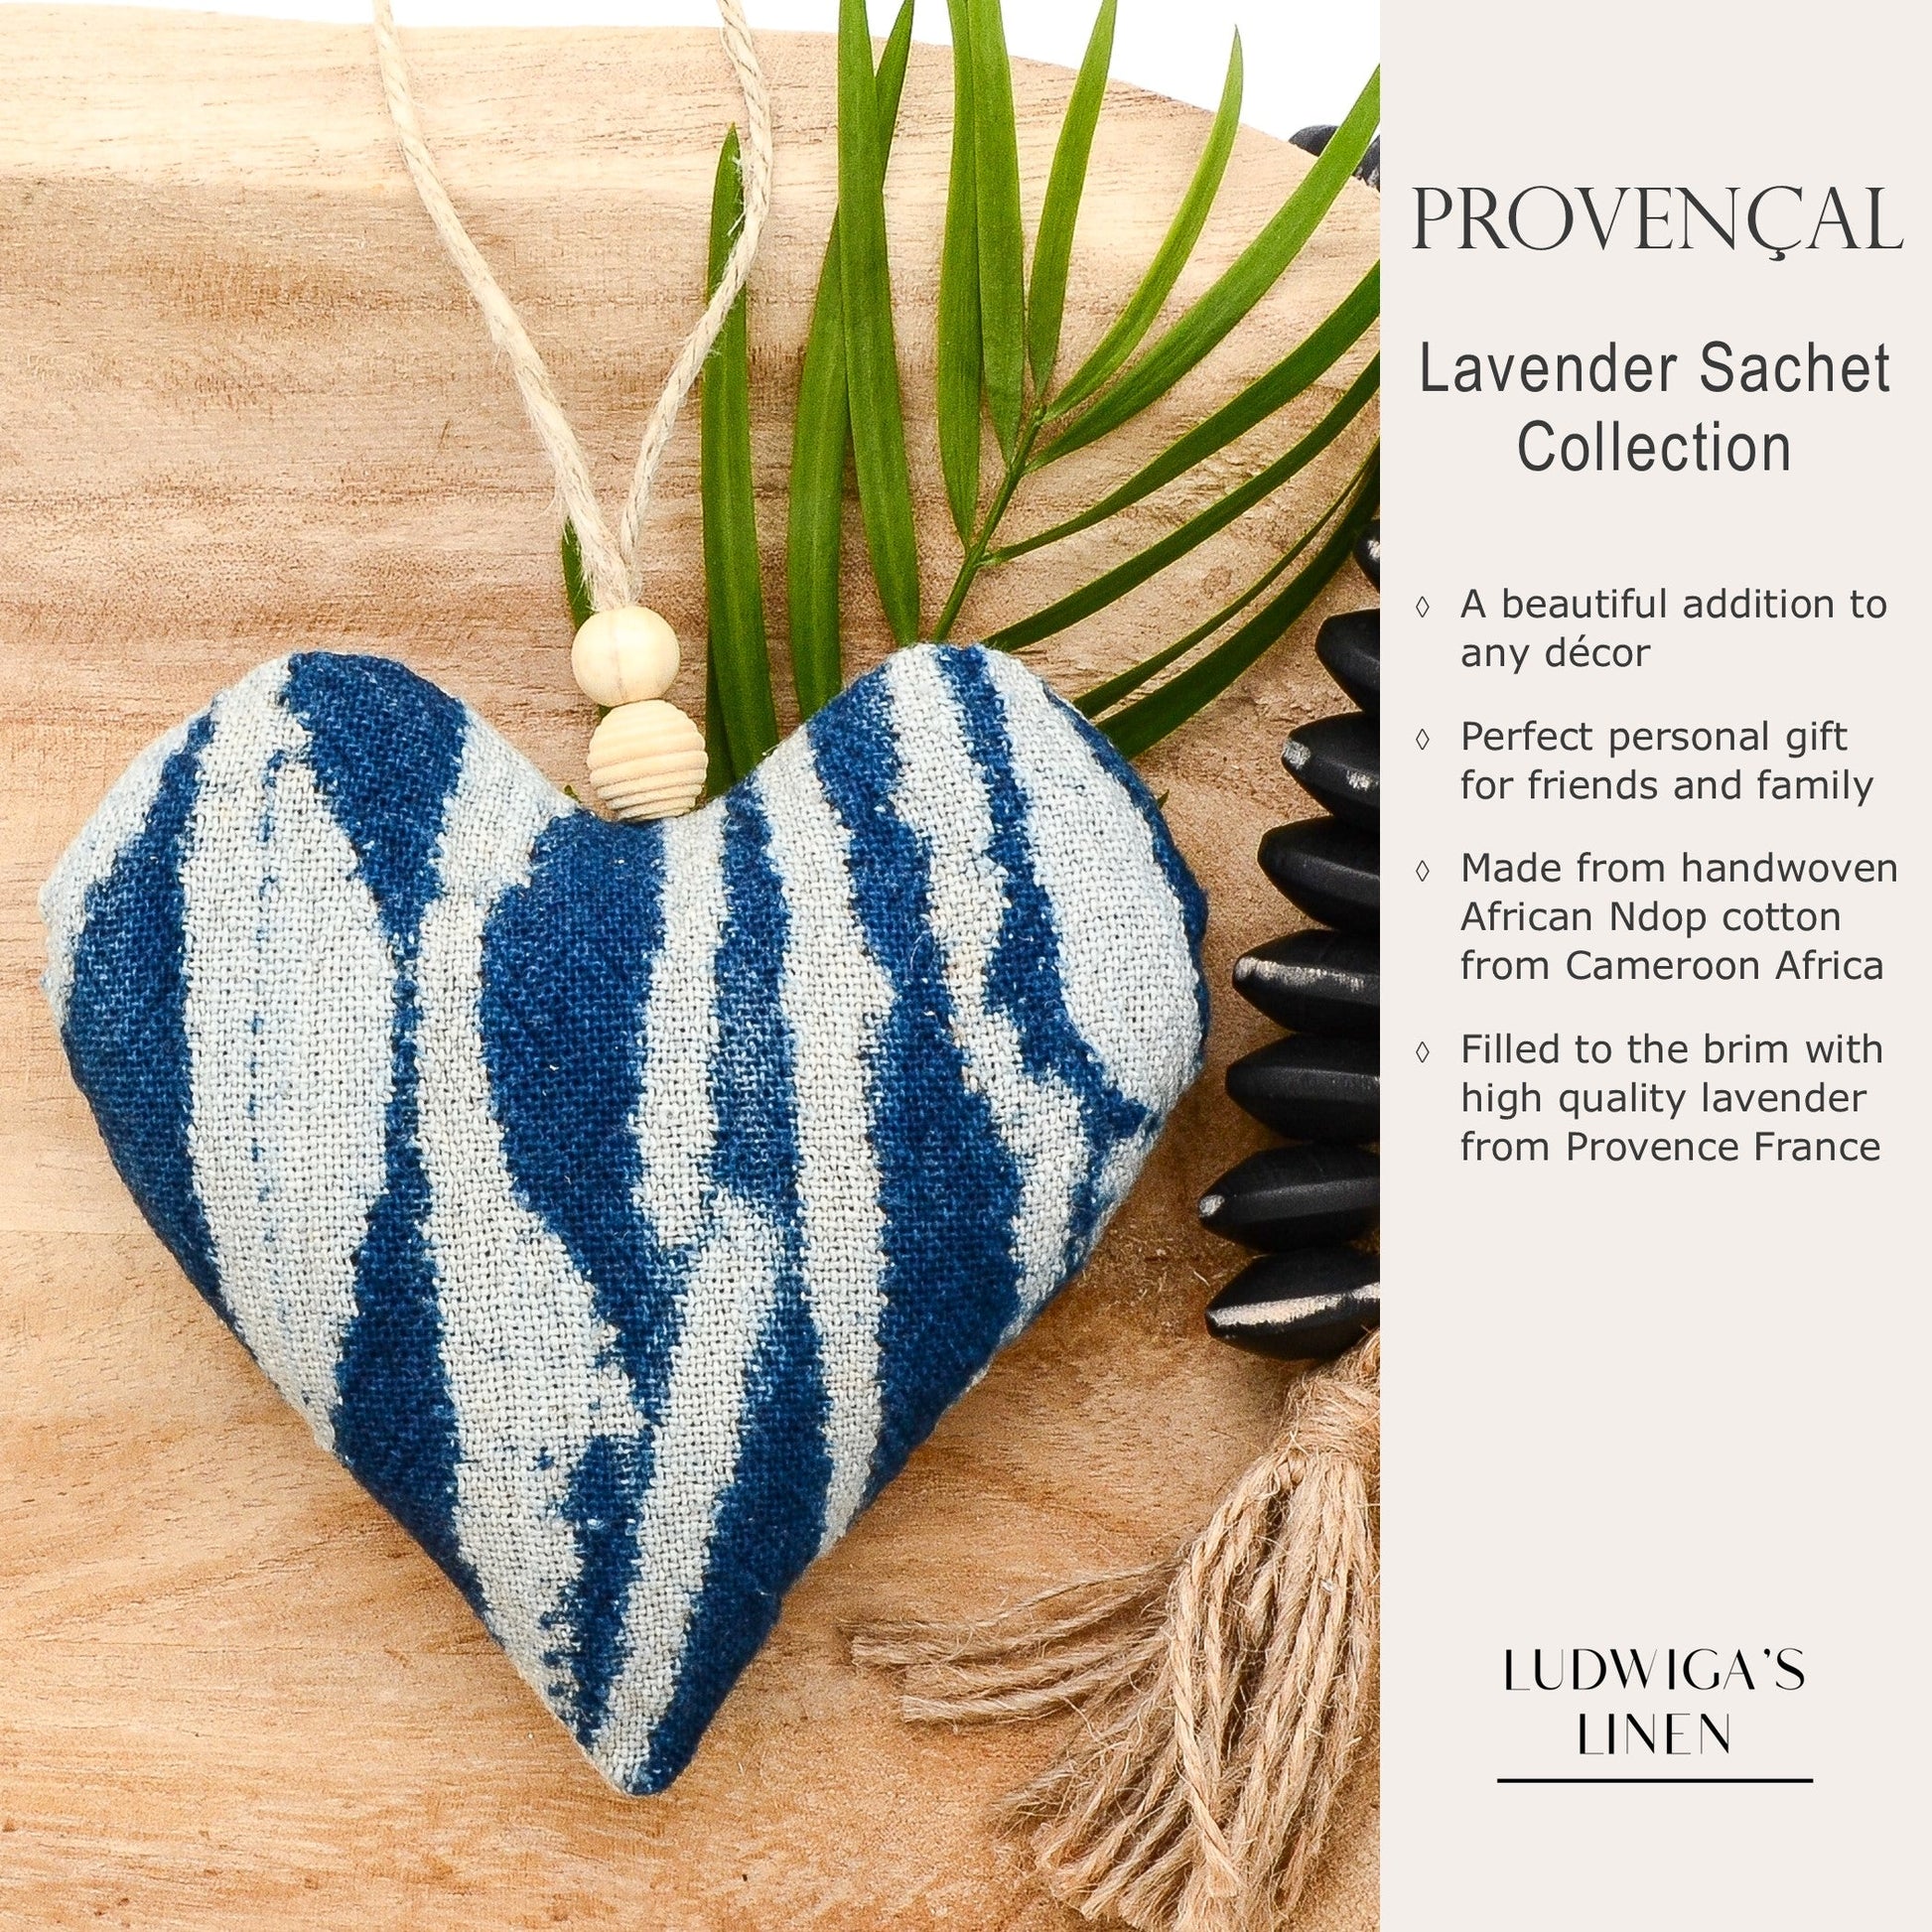 Lavender sachet heart made from handwoven African Ndop cotton, hemp twine tie with wooden beads, and filled with high quality lavender from Provence France